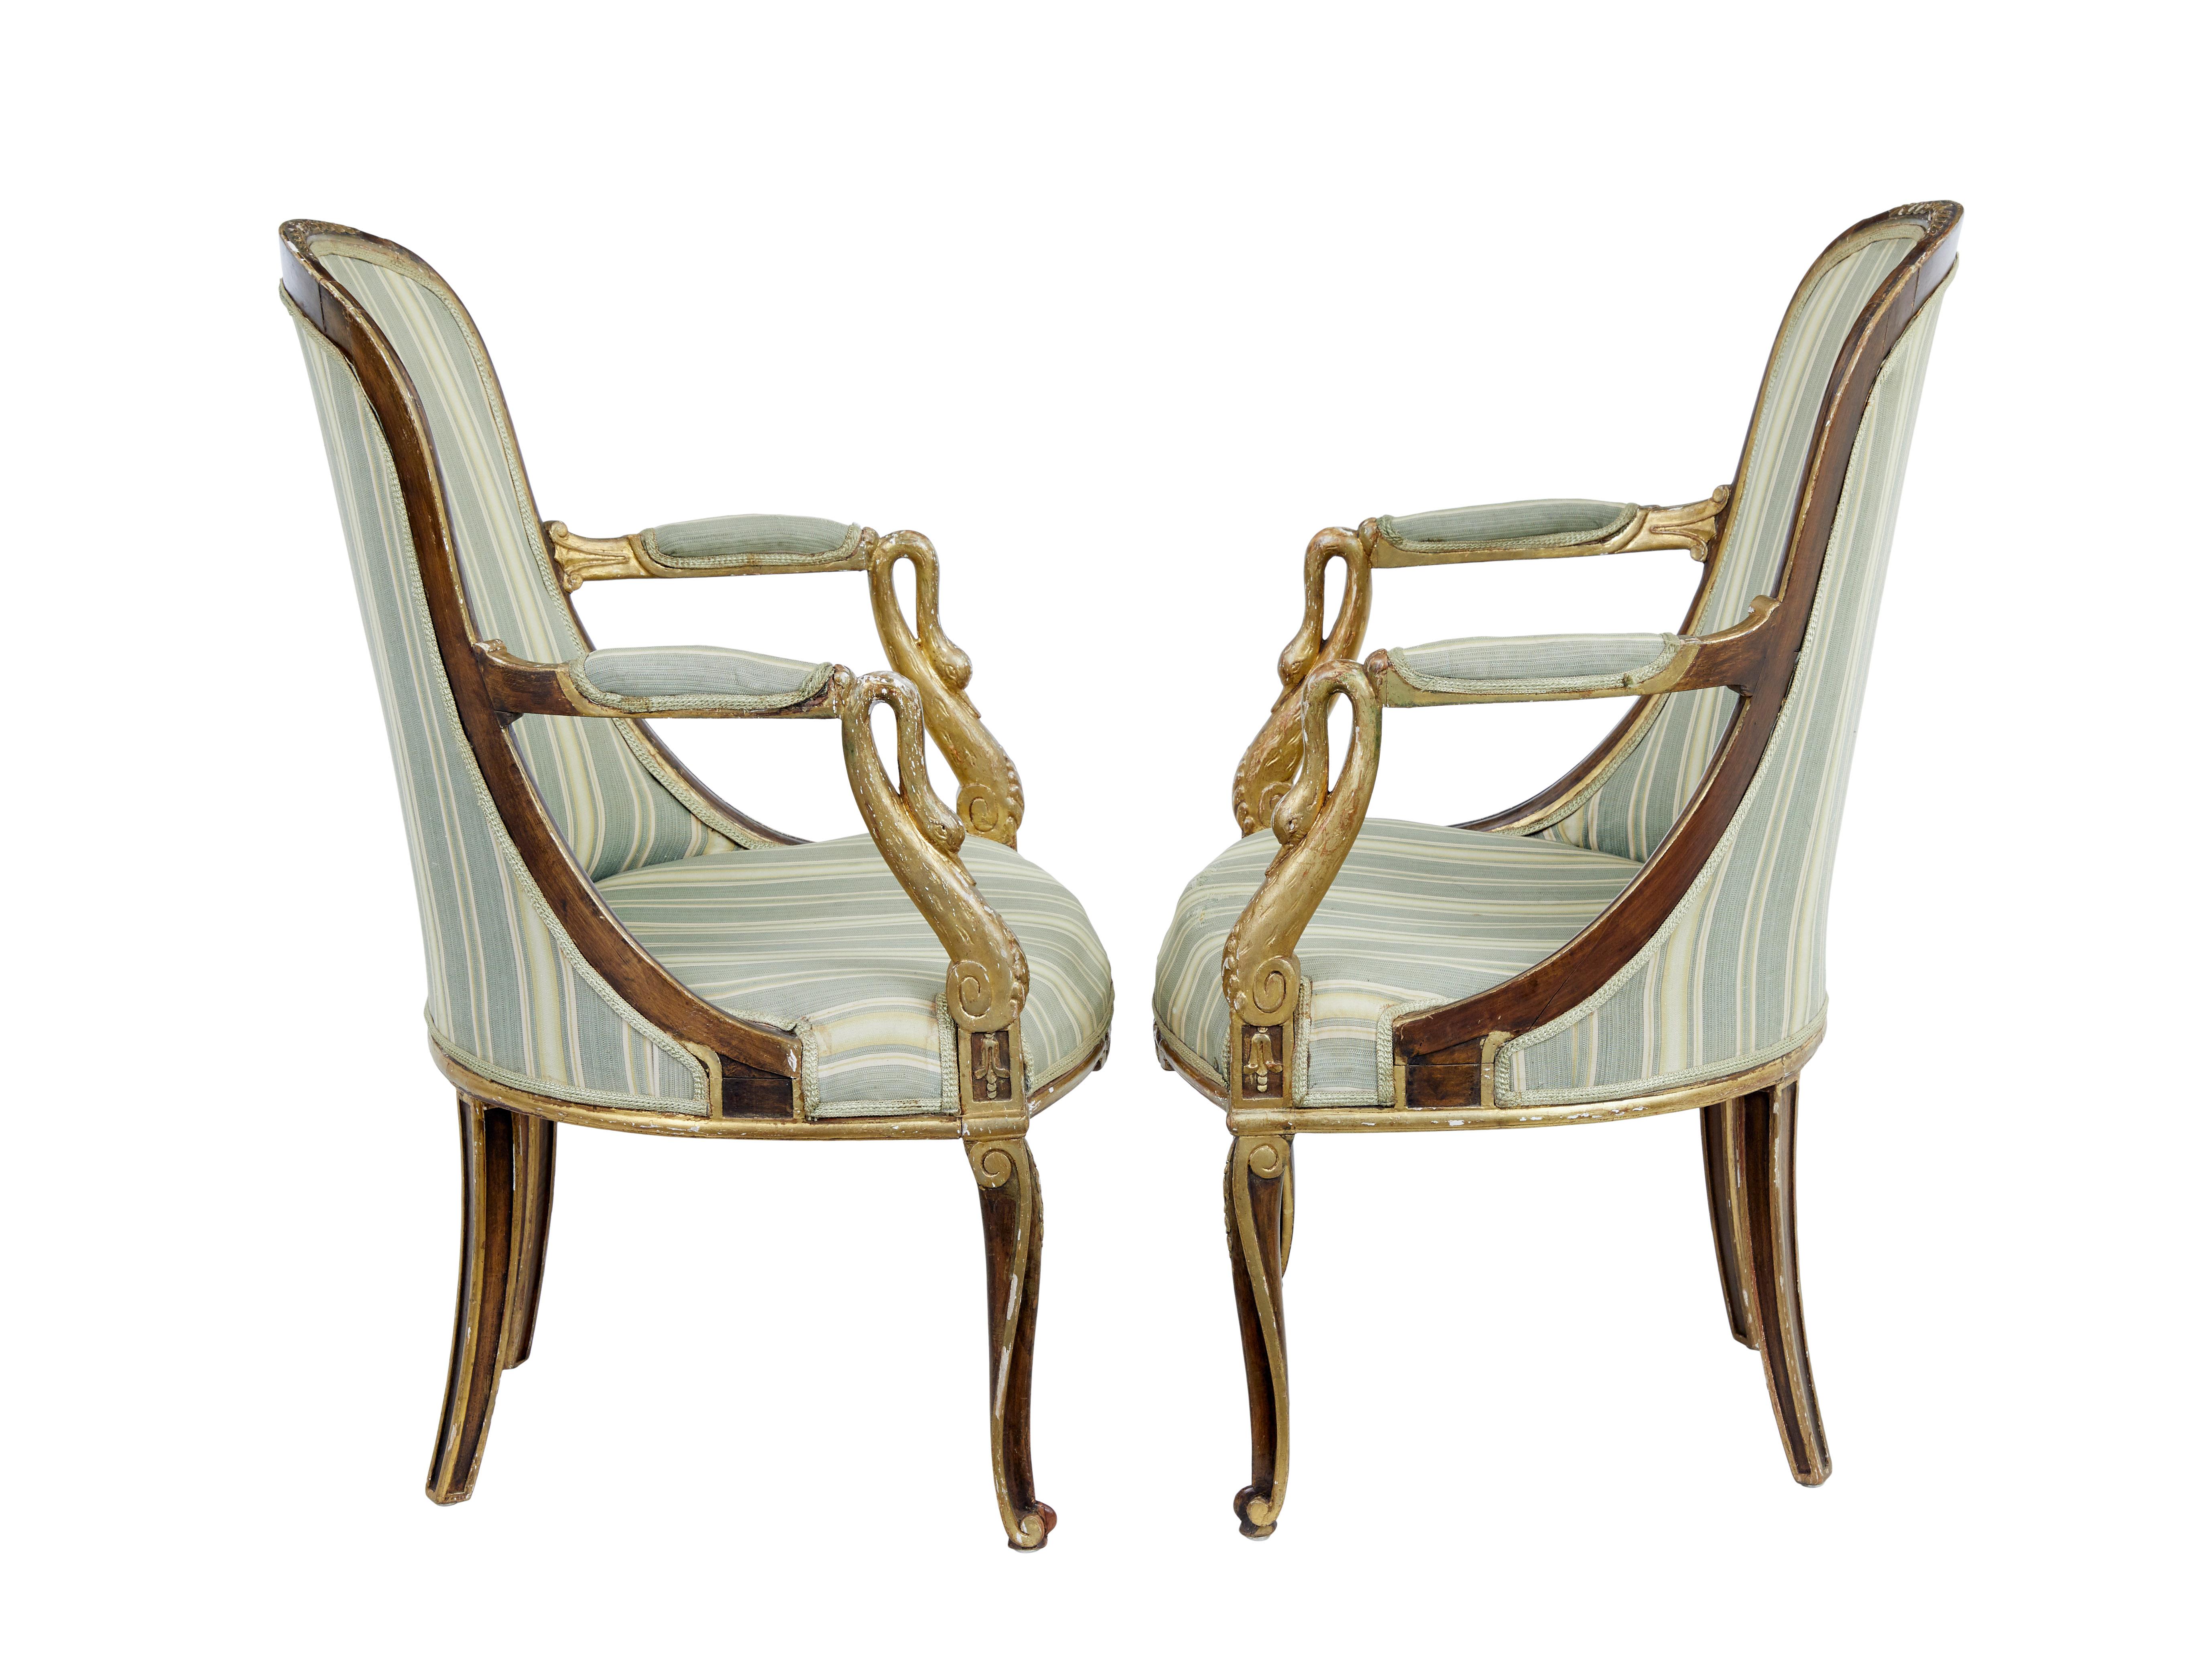 Pair of mid 19th century French walnut and gilt armchairs 2